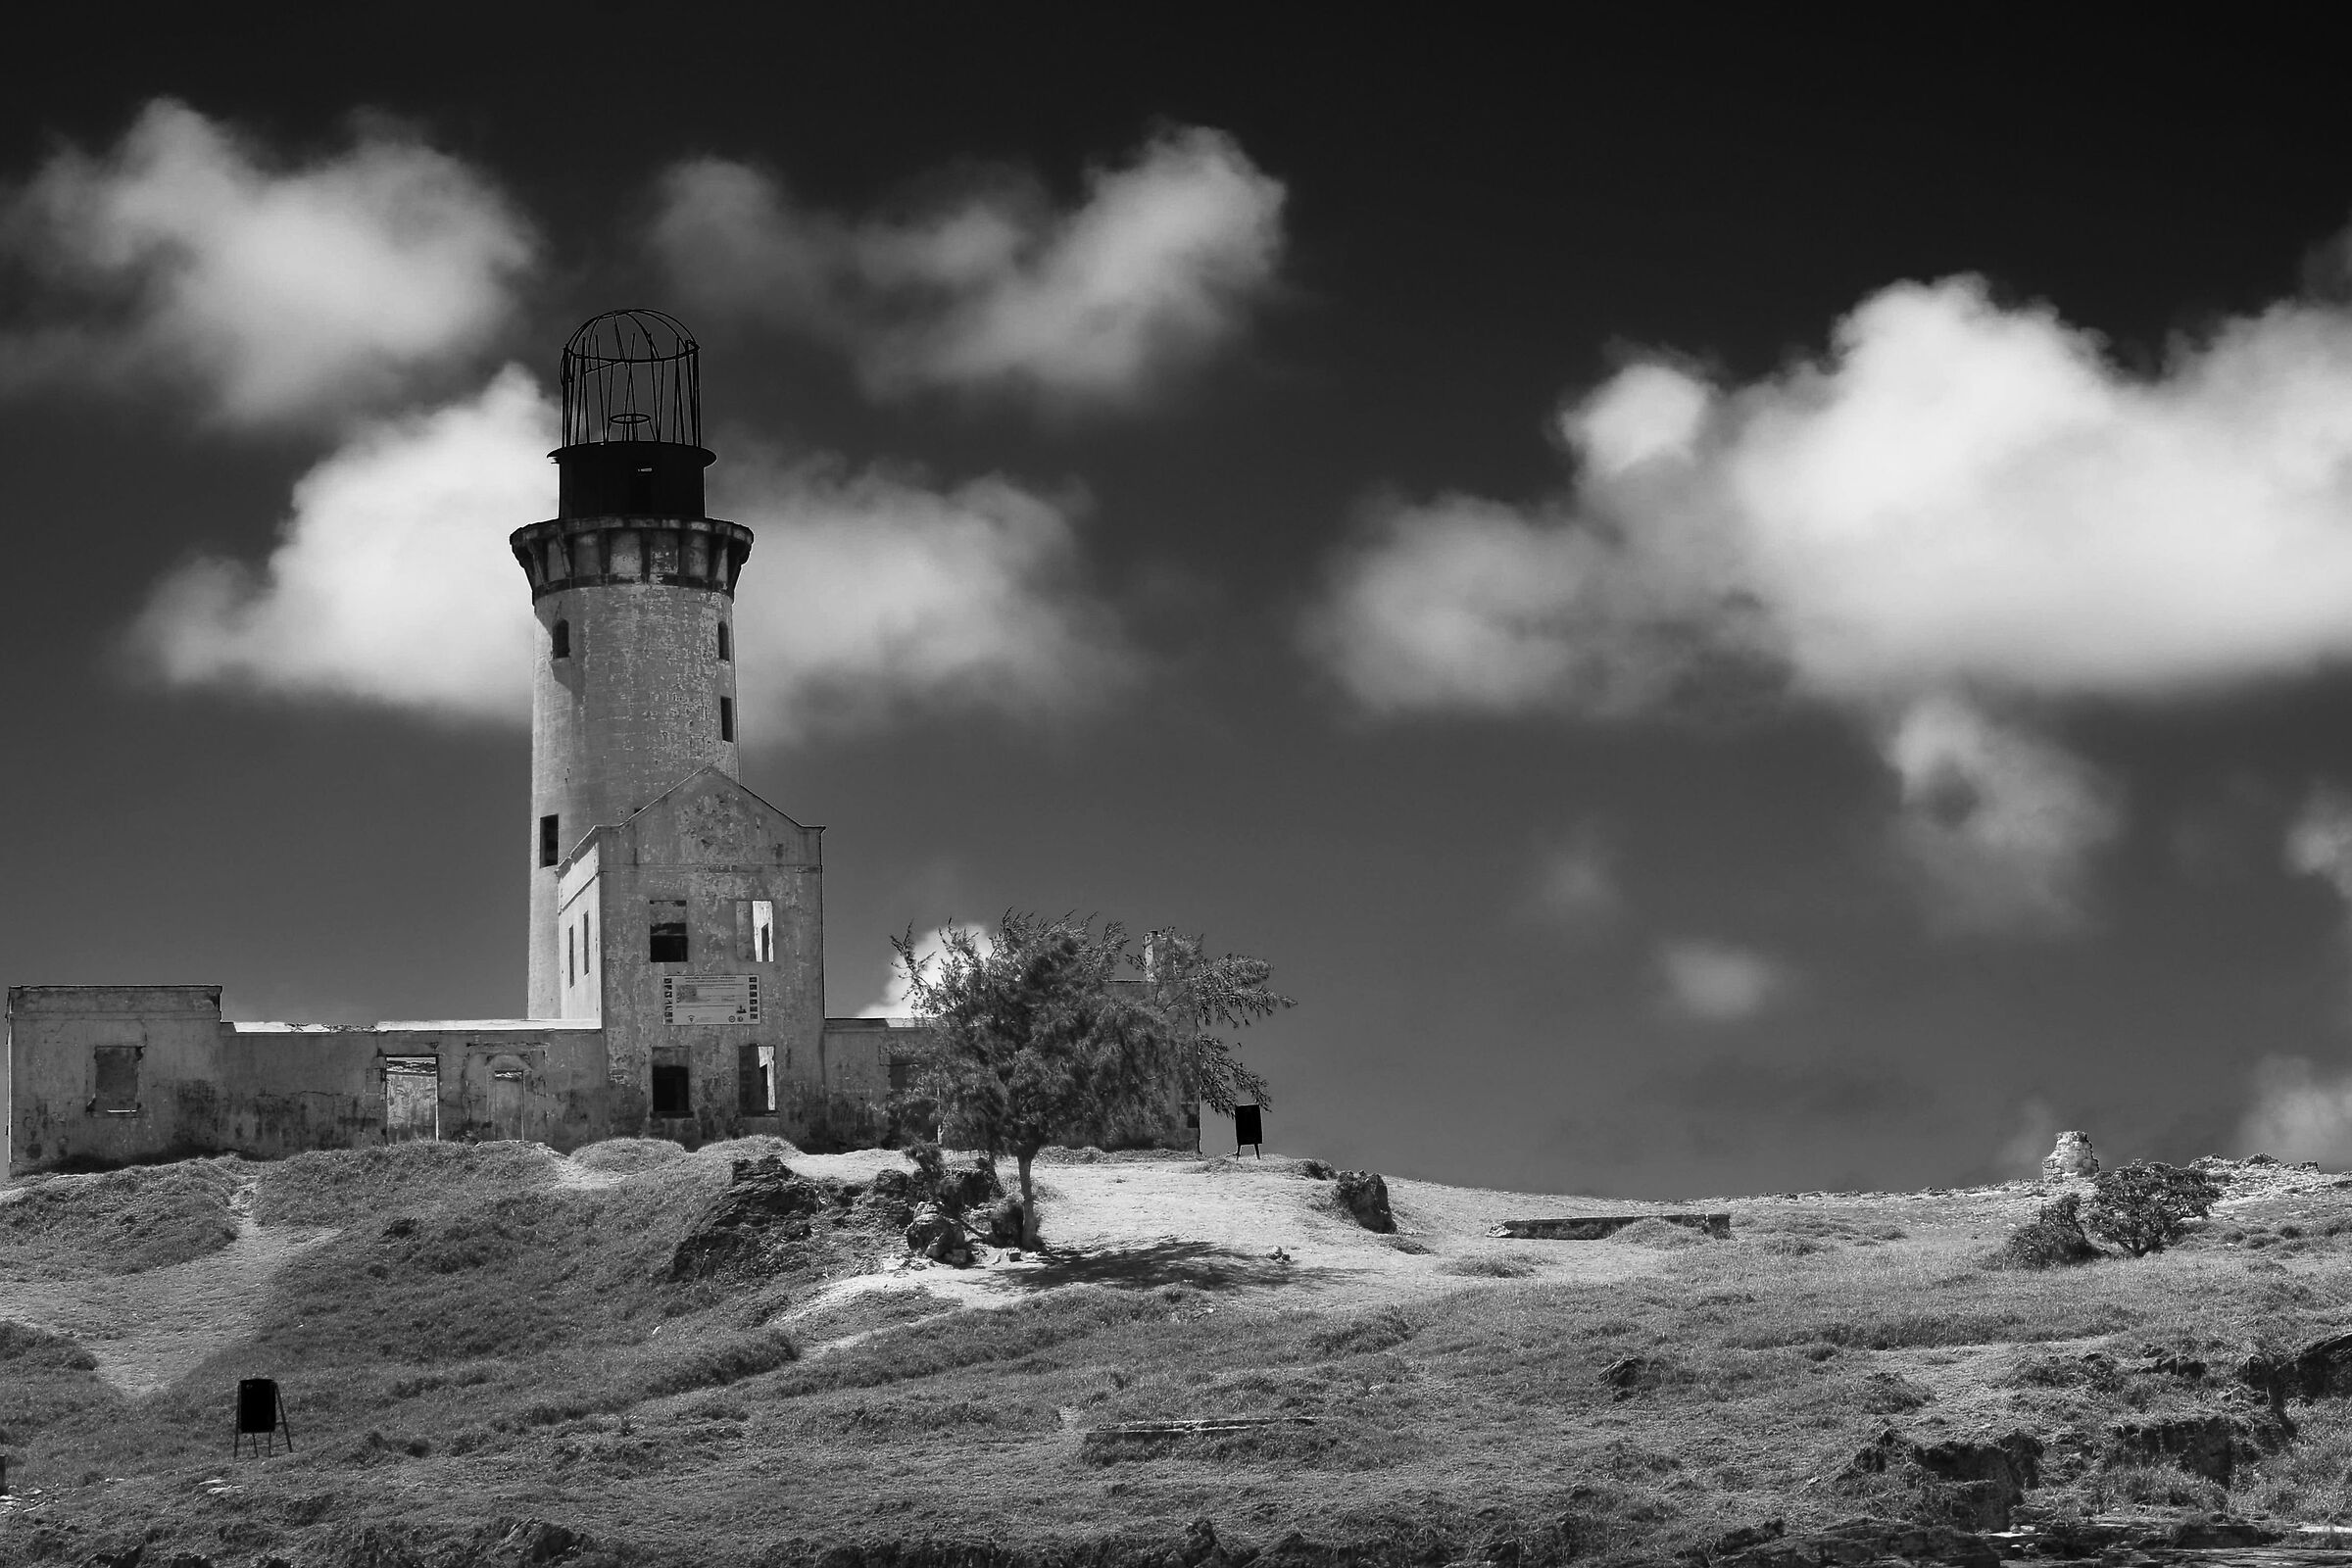 The Old Lighthouse...